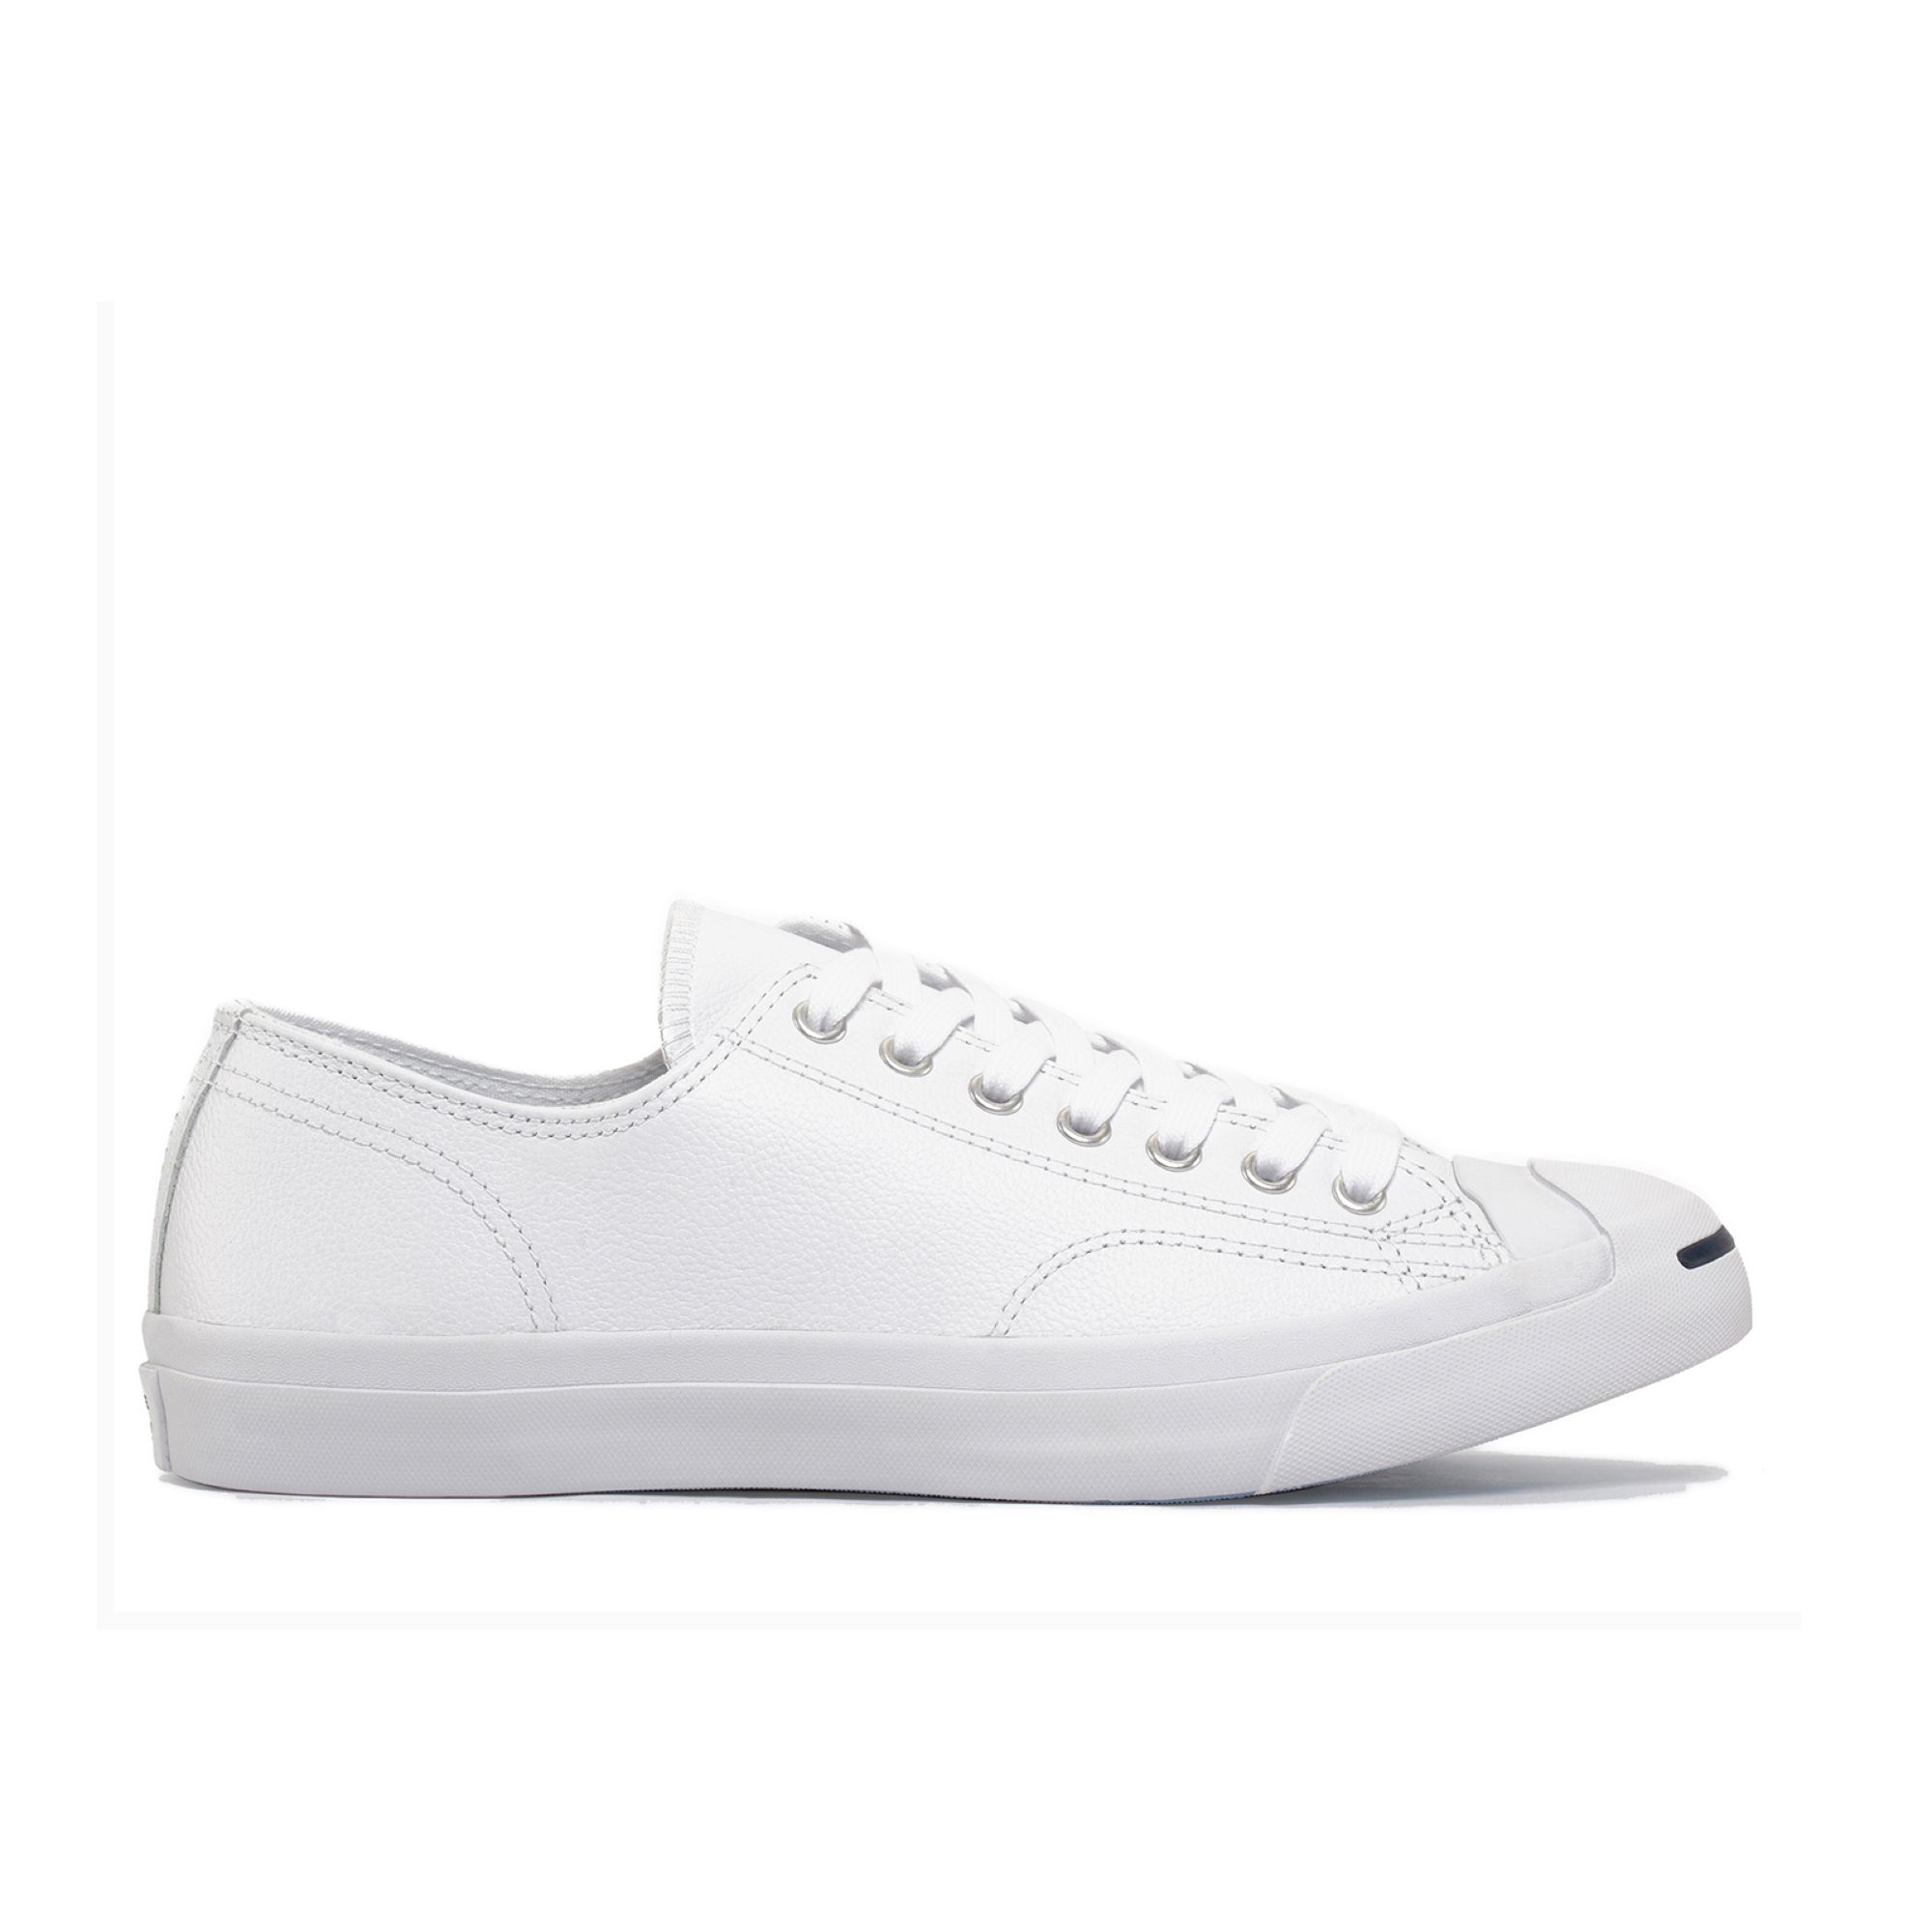 converse jack purcell leather philippines